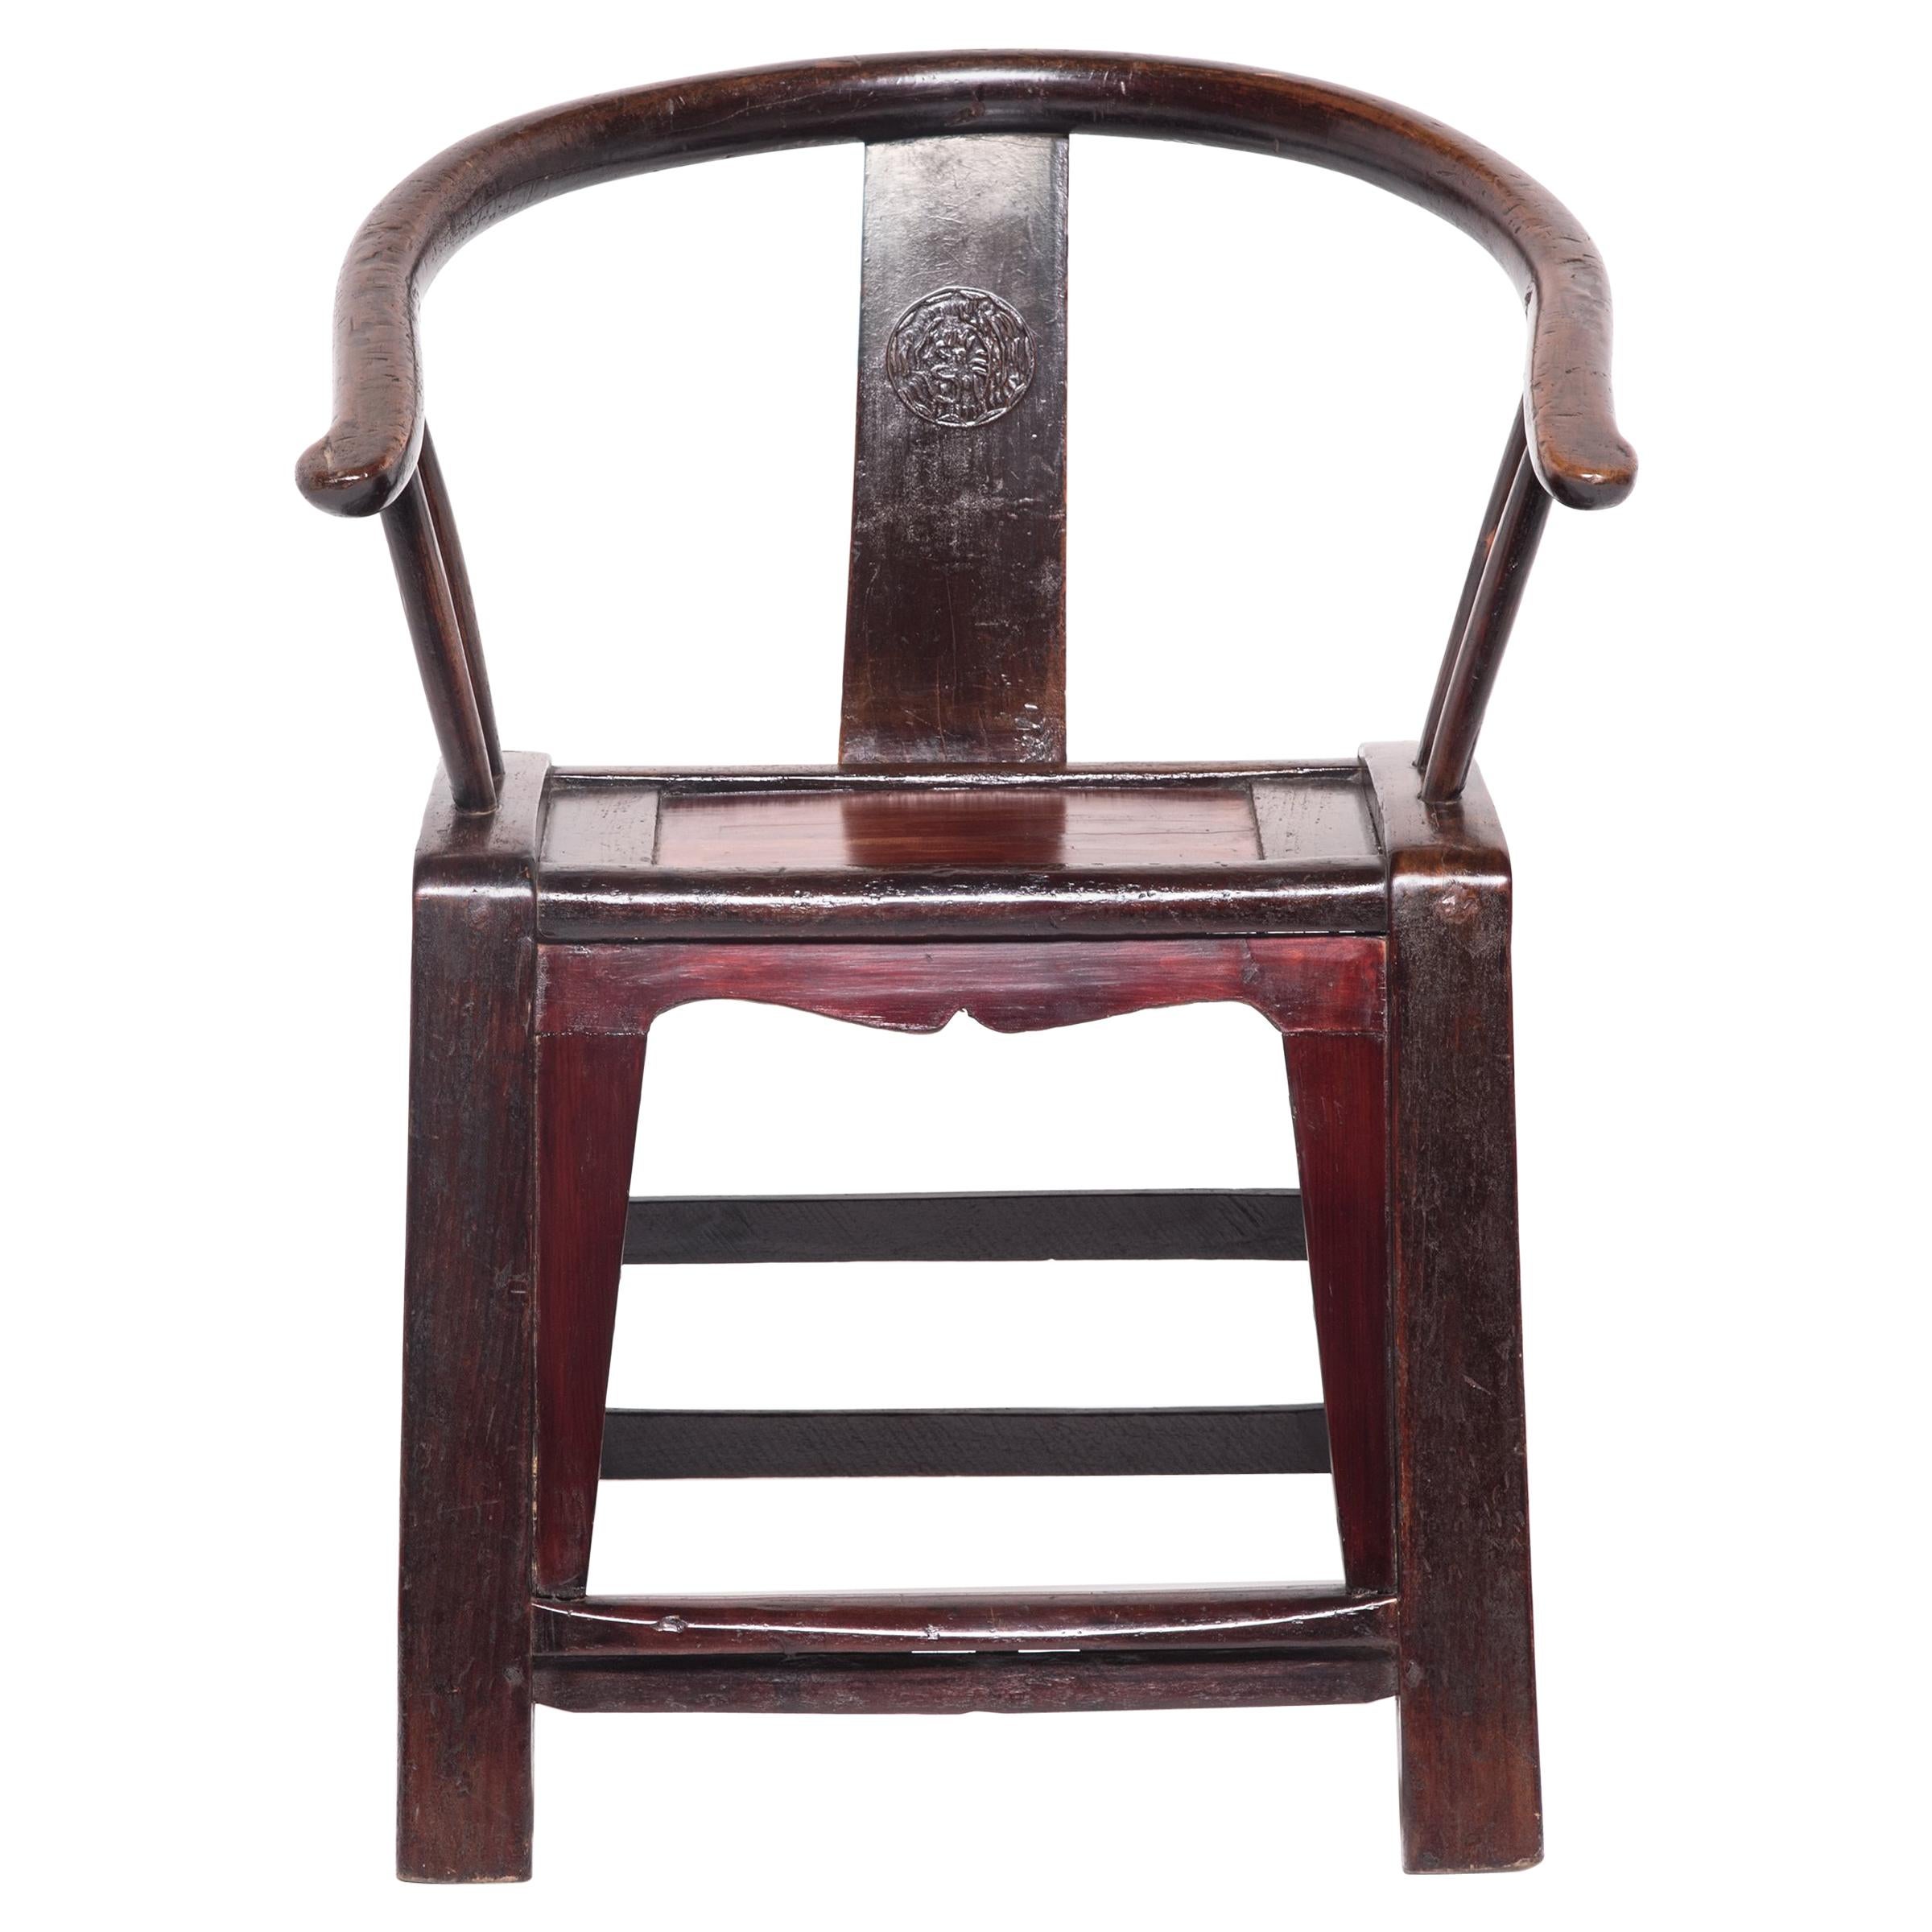 19th Century Chinese Provincial Roundback Chair